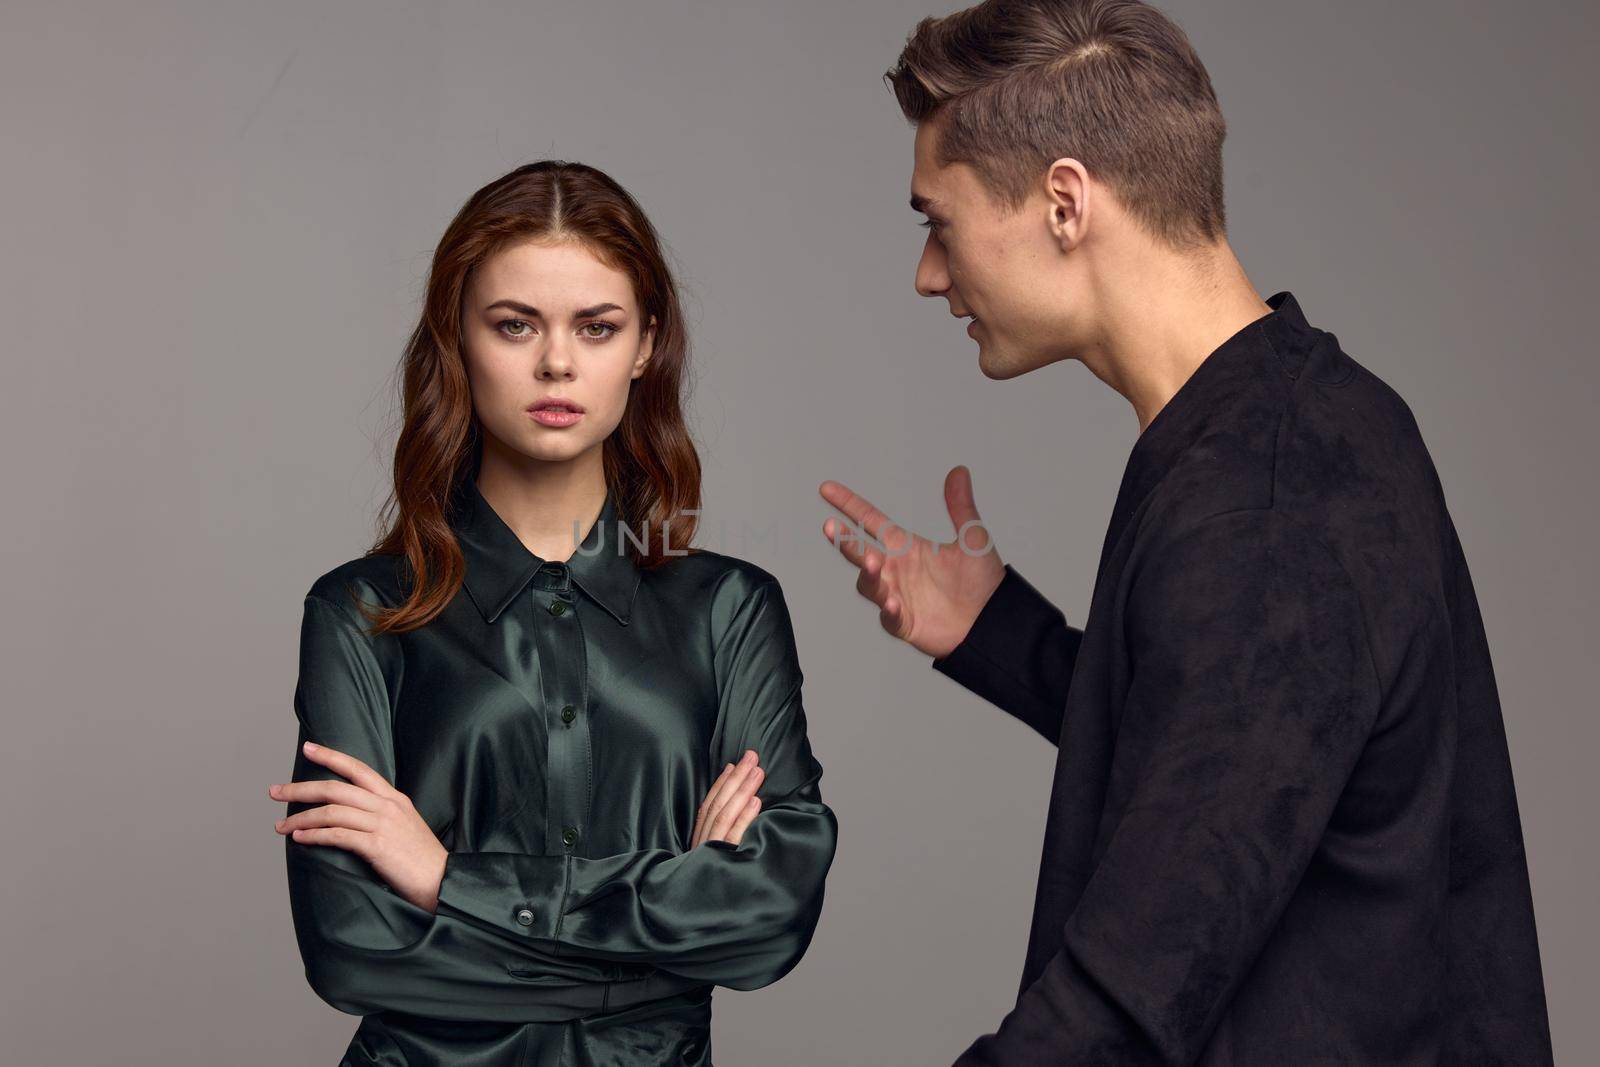 An indignant man in a black jacket gestures with his hands and looks at the woman. High quality photo